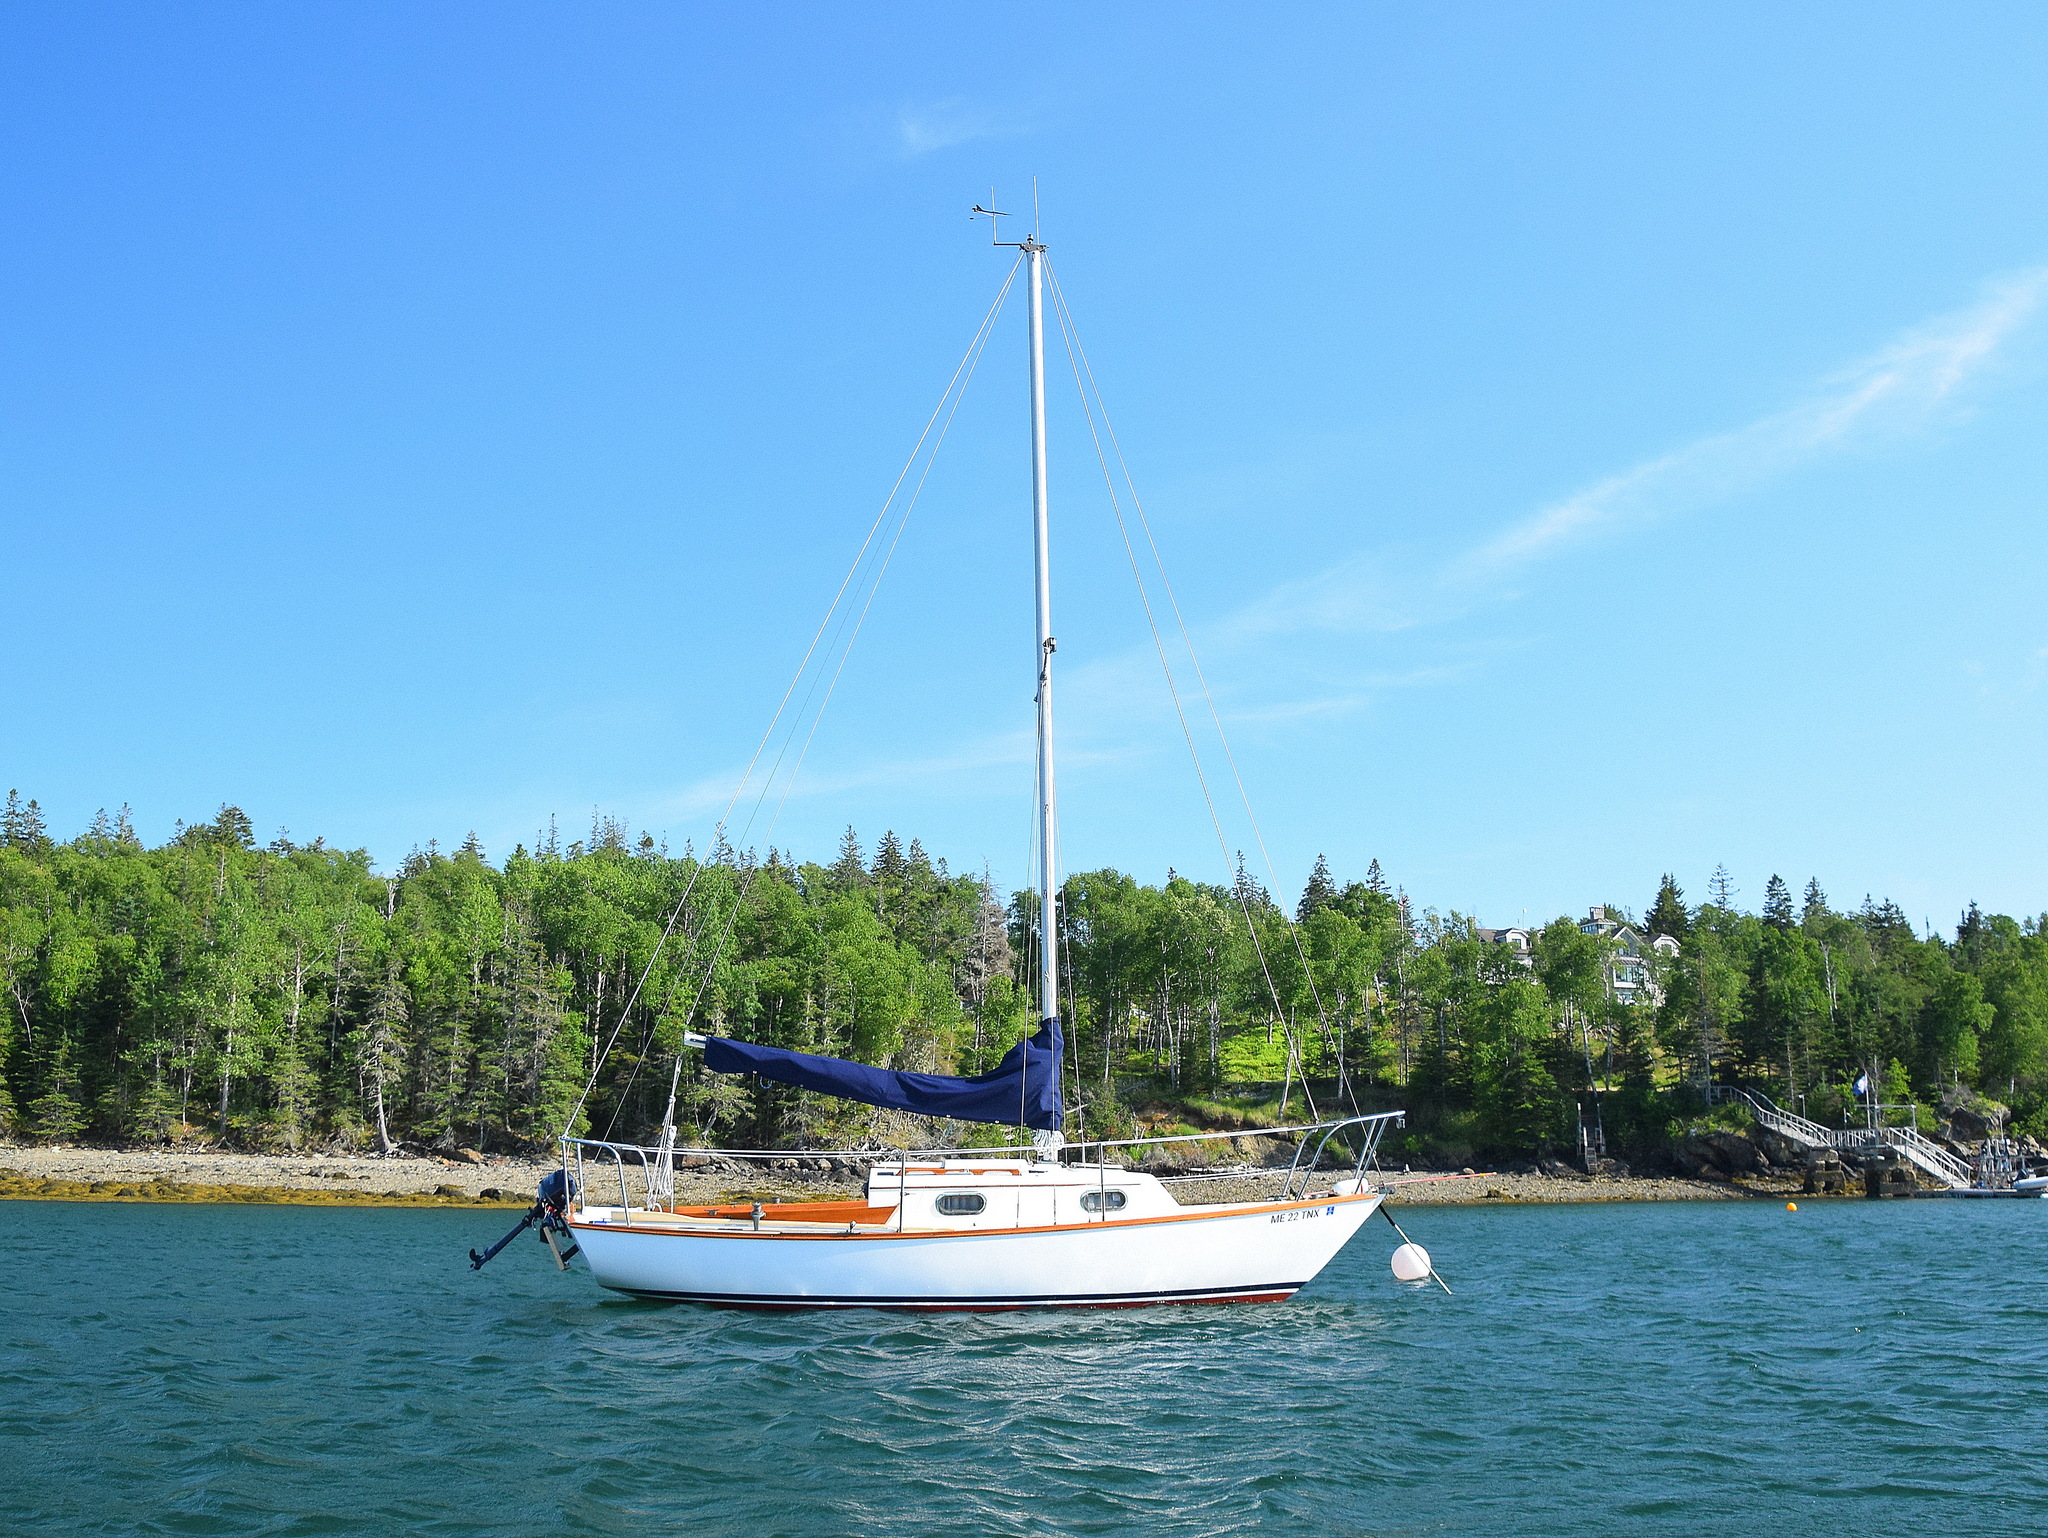 Arietta on her mooring after the refit